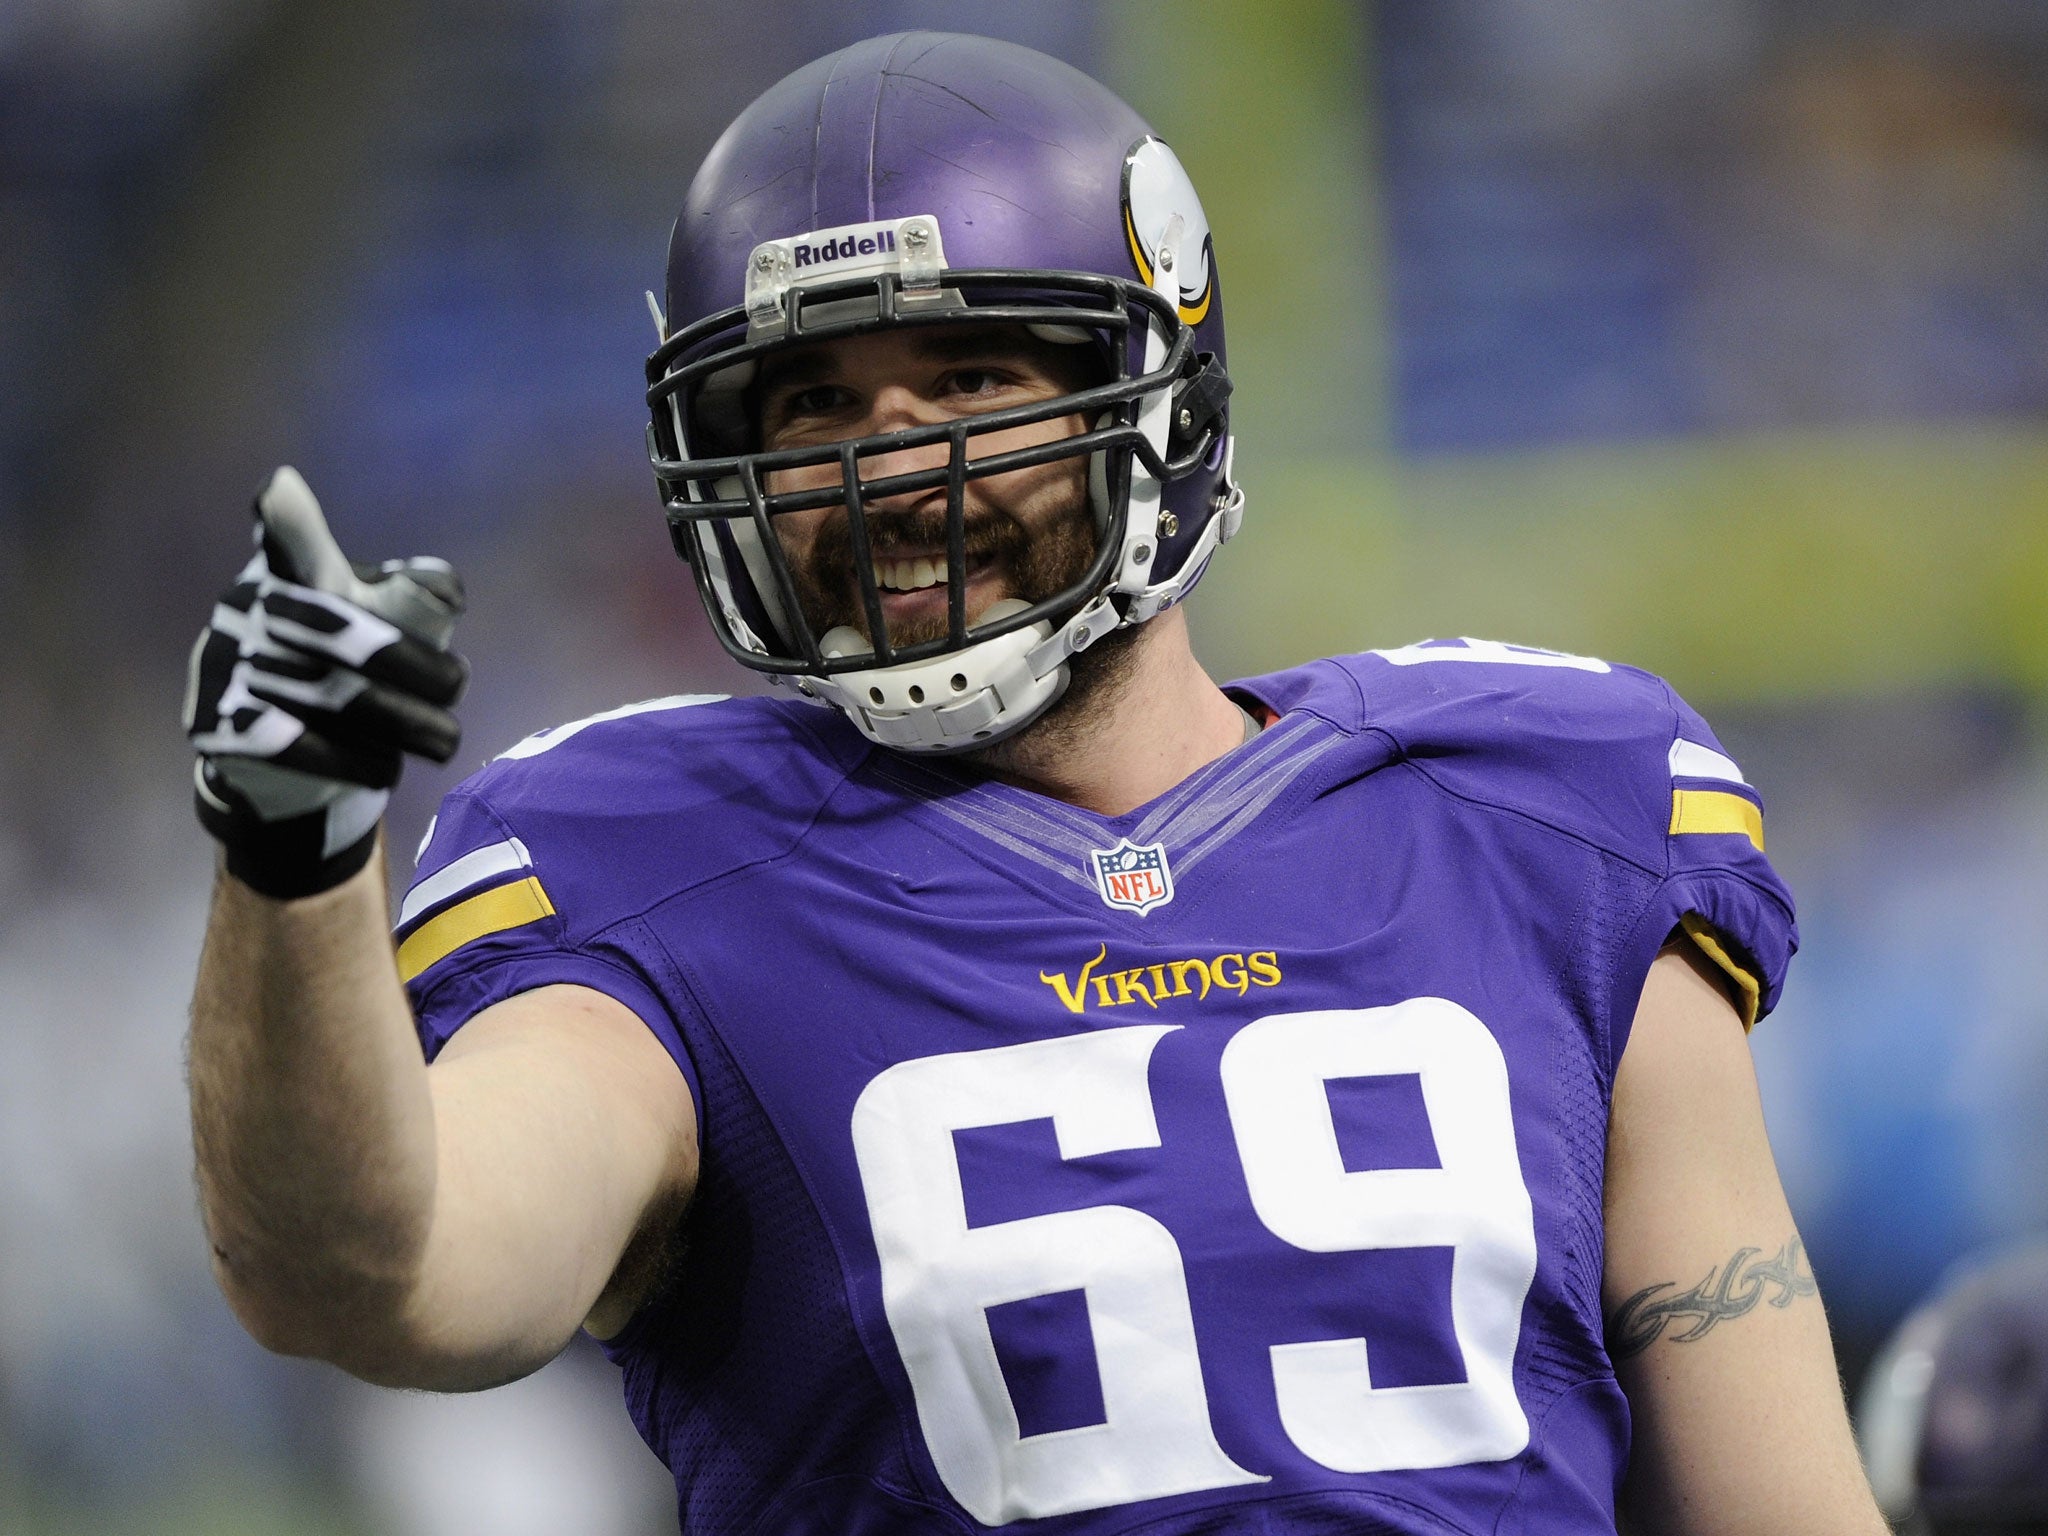 Jared Allen #69 of the Minnesota Vikings looks on before the game against the Detroit Lions on December 29, 2013